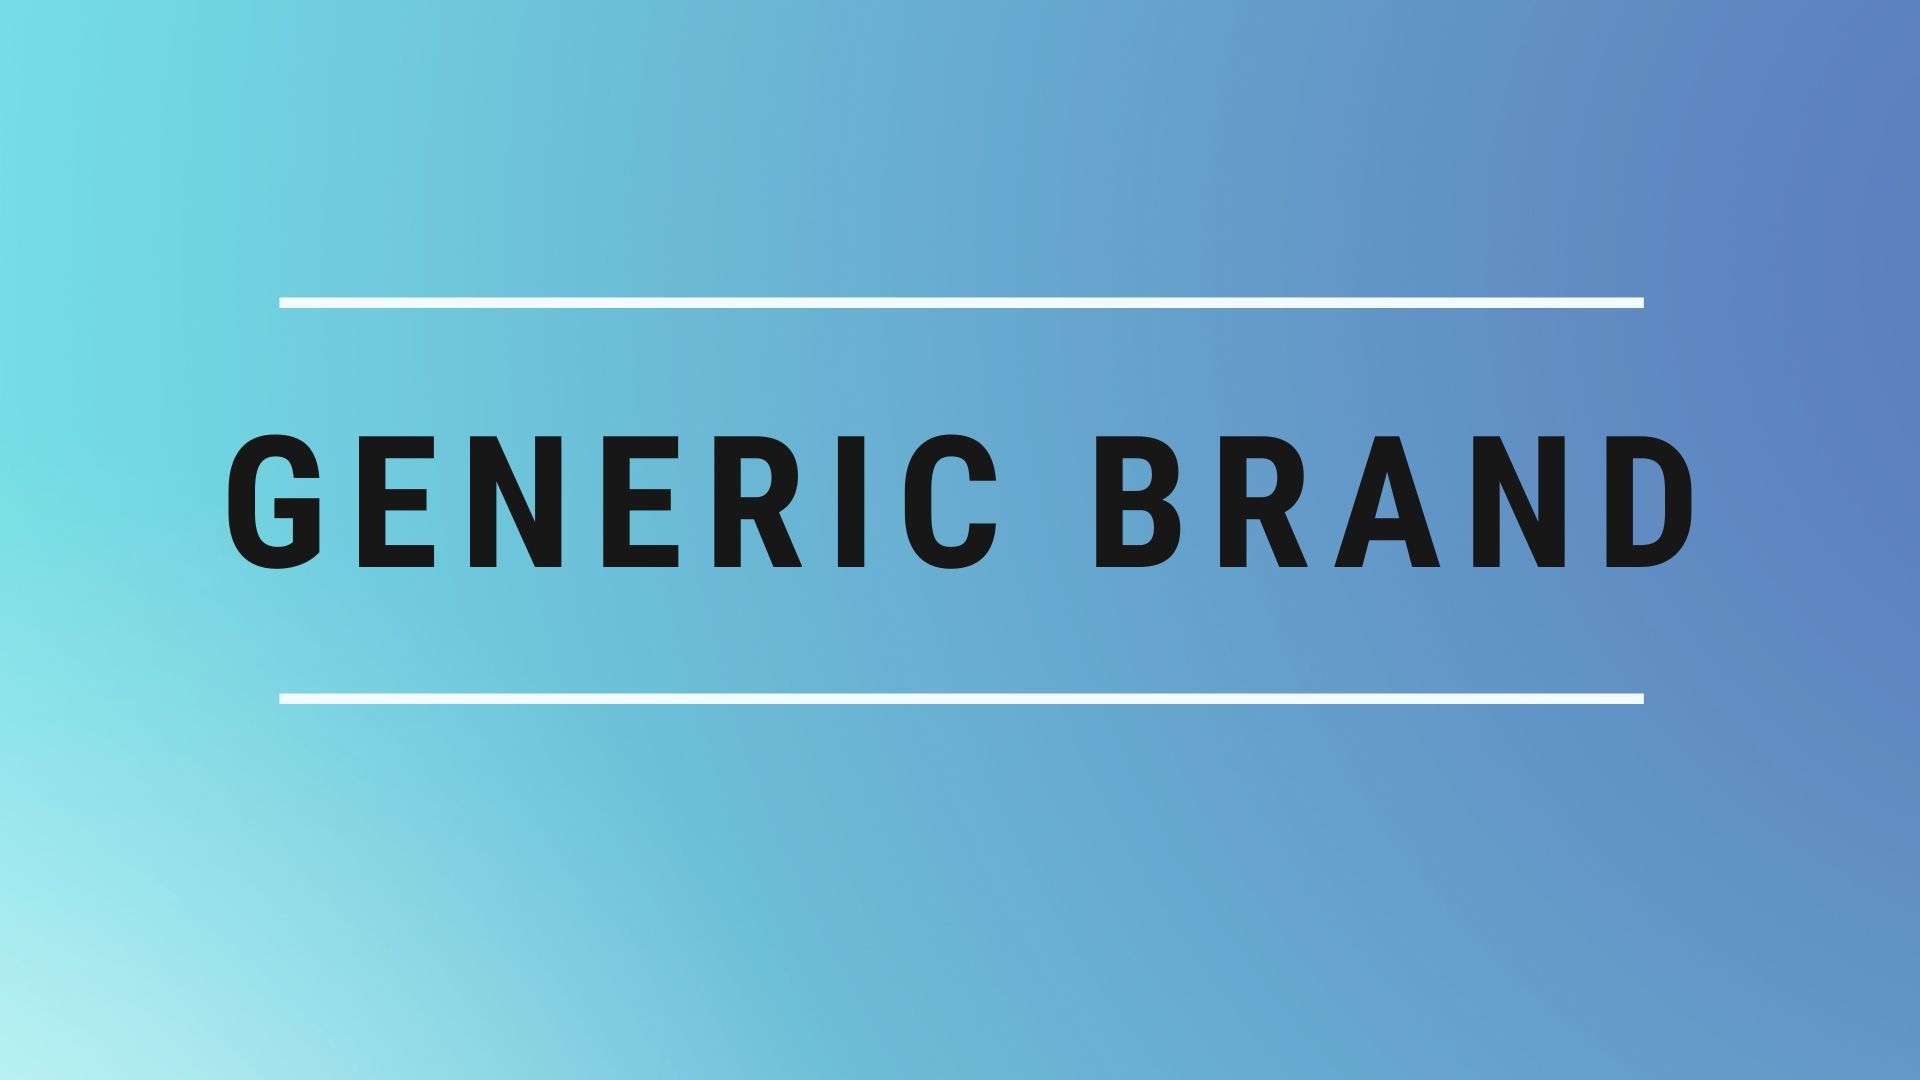 Generic Brand Definition - Difference from Brand Name